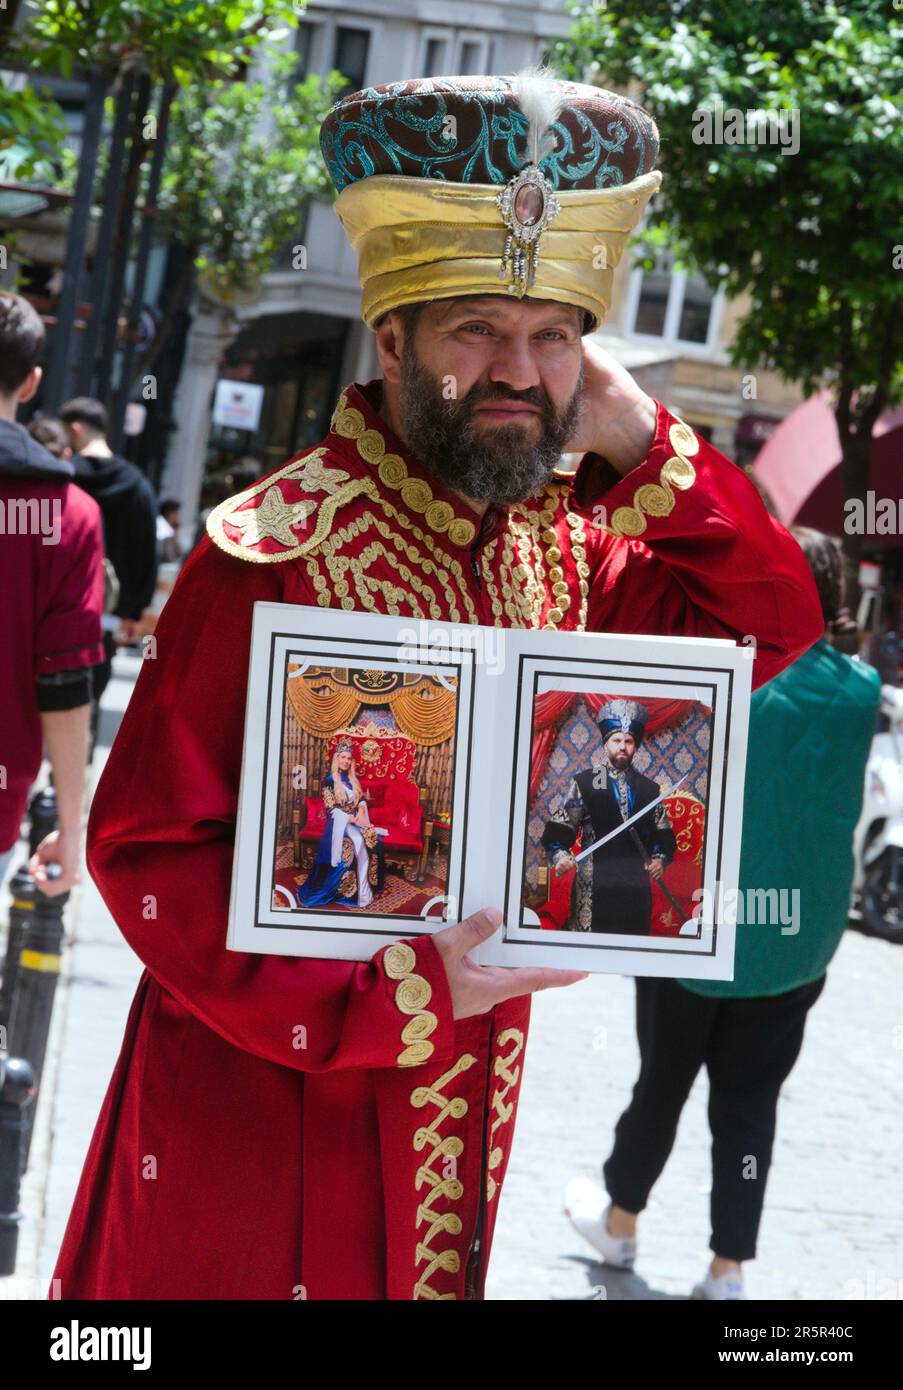 A man in traditional Turkish clothing or clothes or costume stands on the street to try to sell a service in Istanbul, Turkey, the Republic of Türkiye. It appears he is asking tourists to pay to dress in tradional Turkish costume and he will take their photograph to produce a photo print or digital image for them. Stock Photo